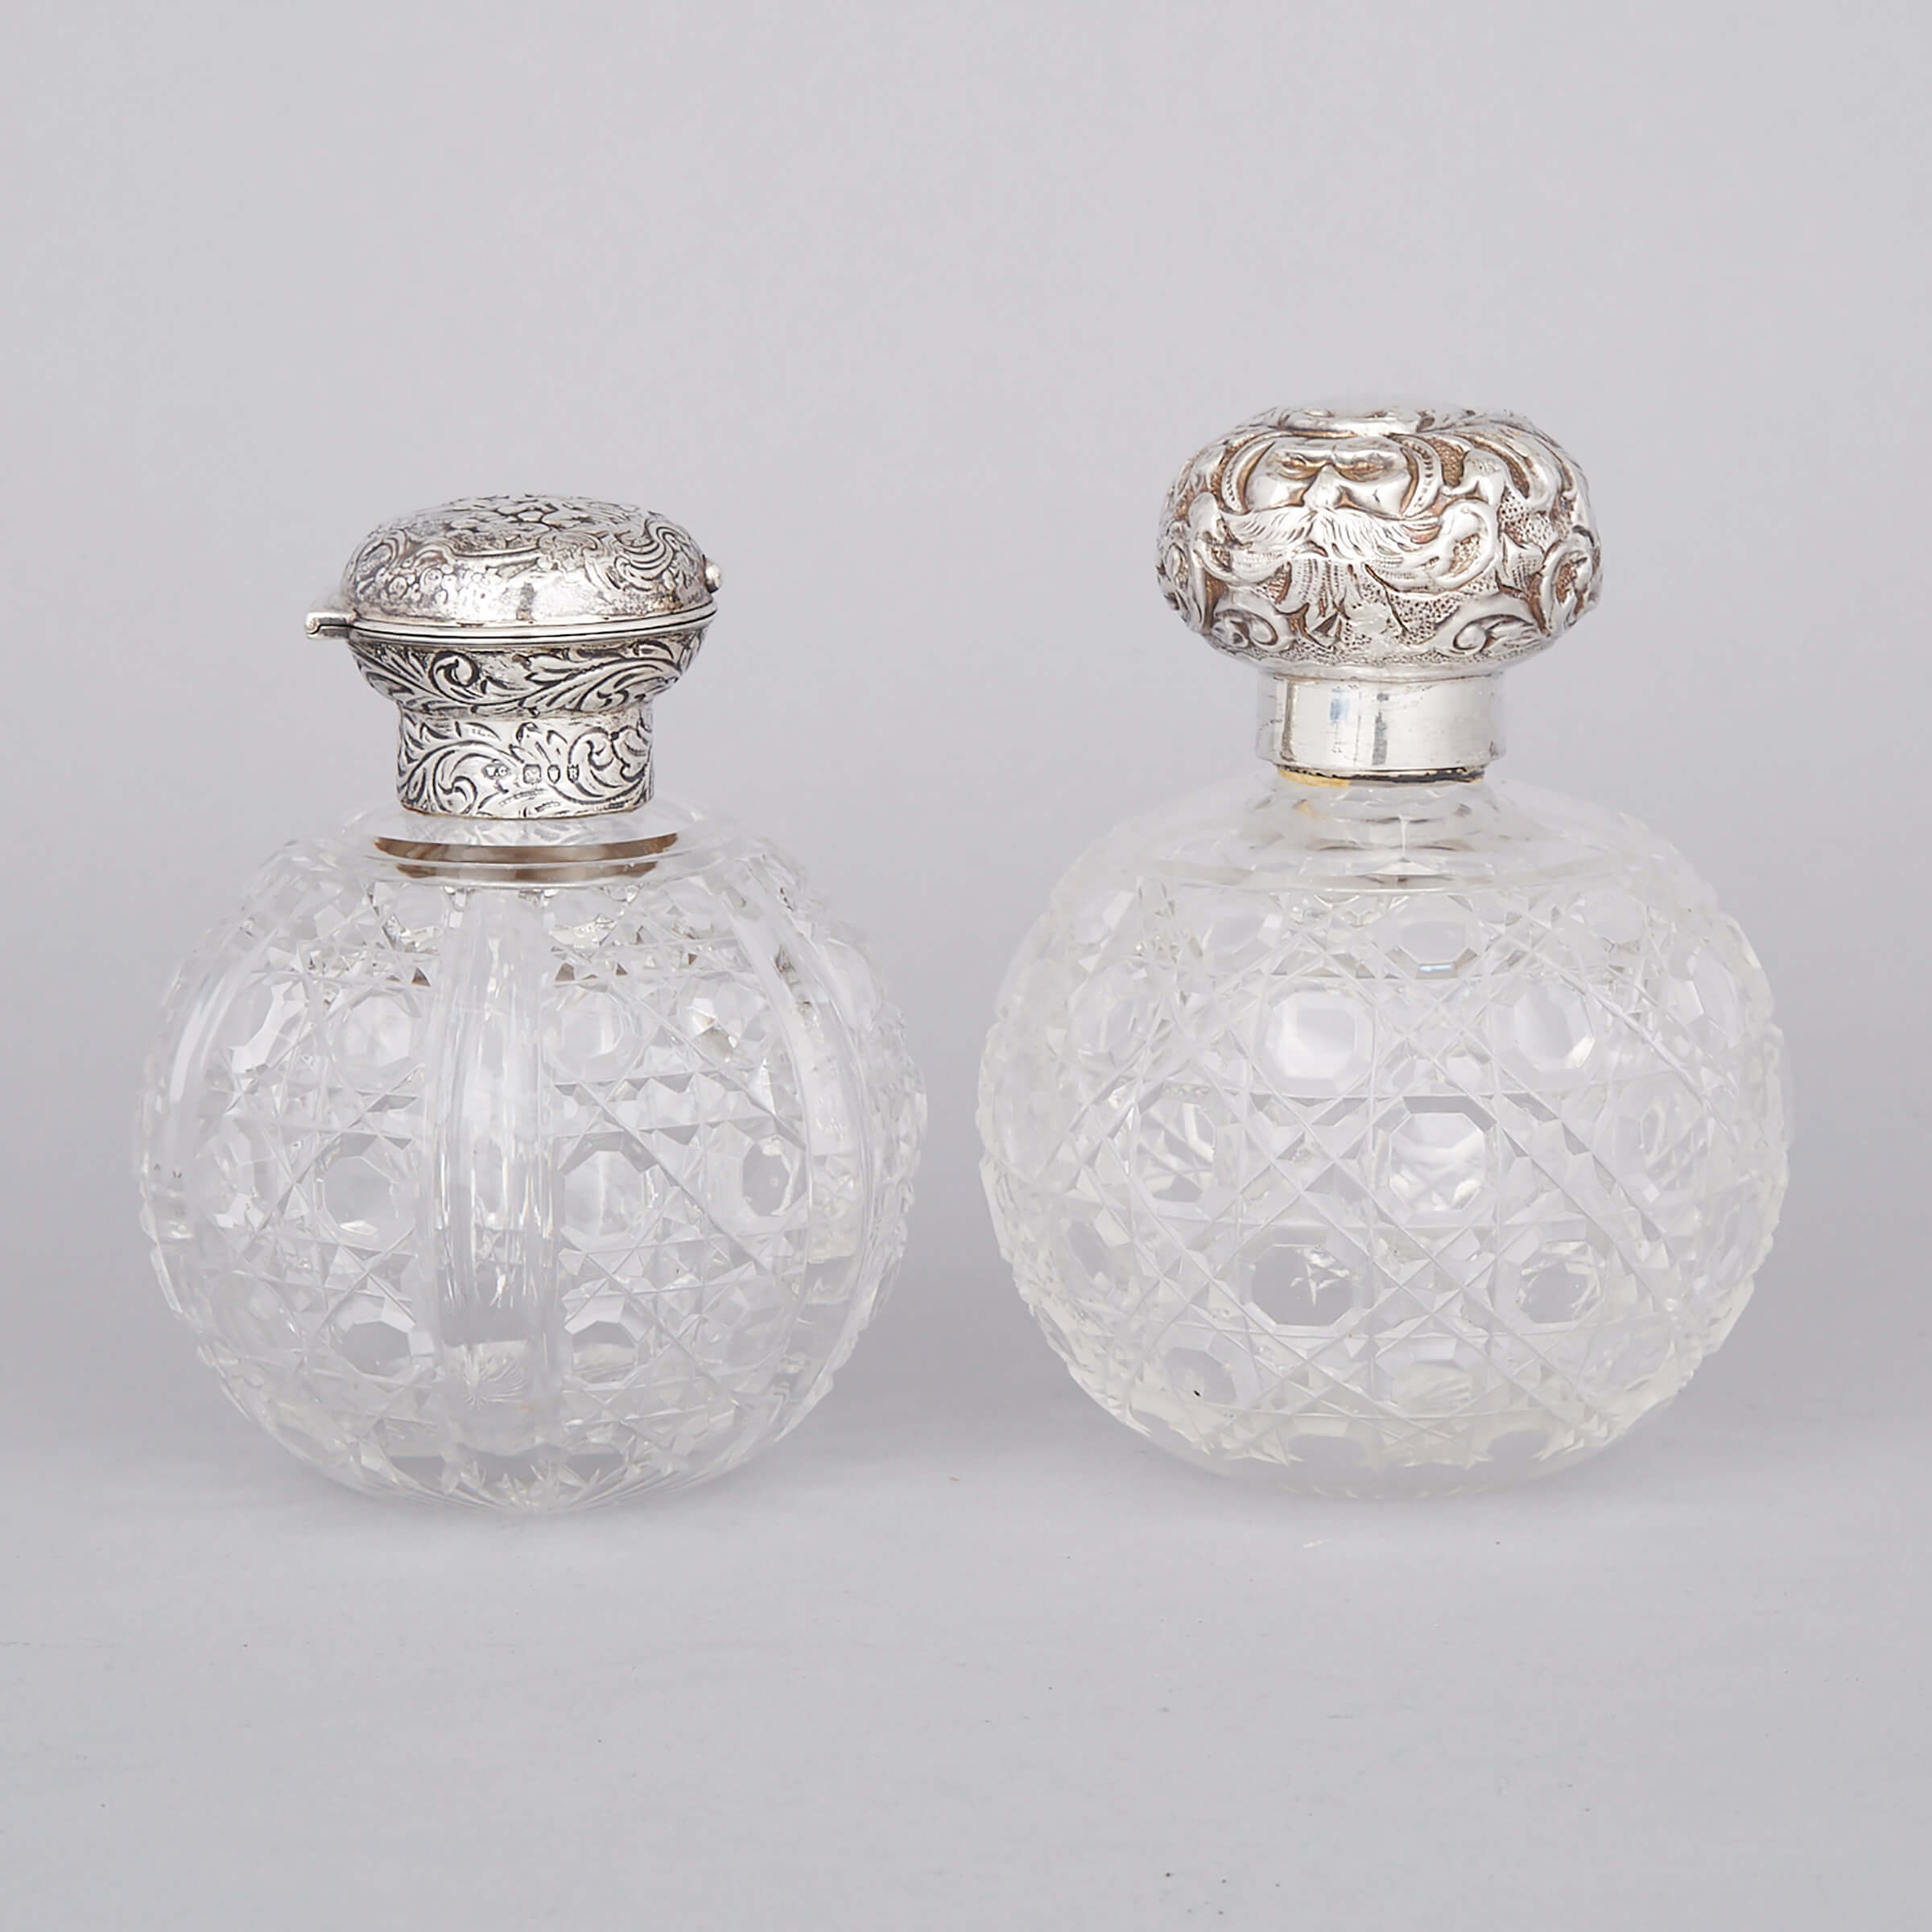 Two English Silver Mounted Cut Glass Toilet Water Bottles, William Comyns & Sons and William Neale & Sons, London and Chester, 1892/1902